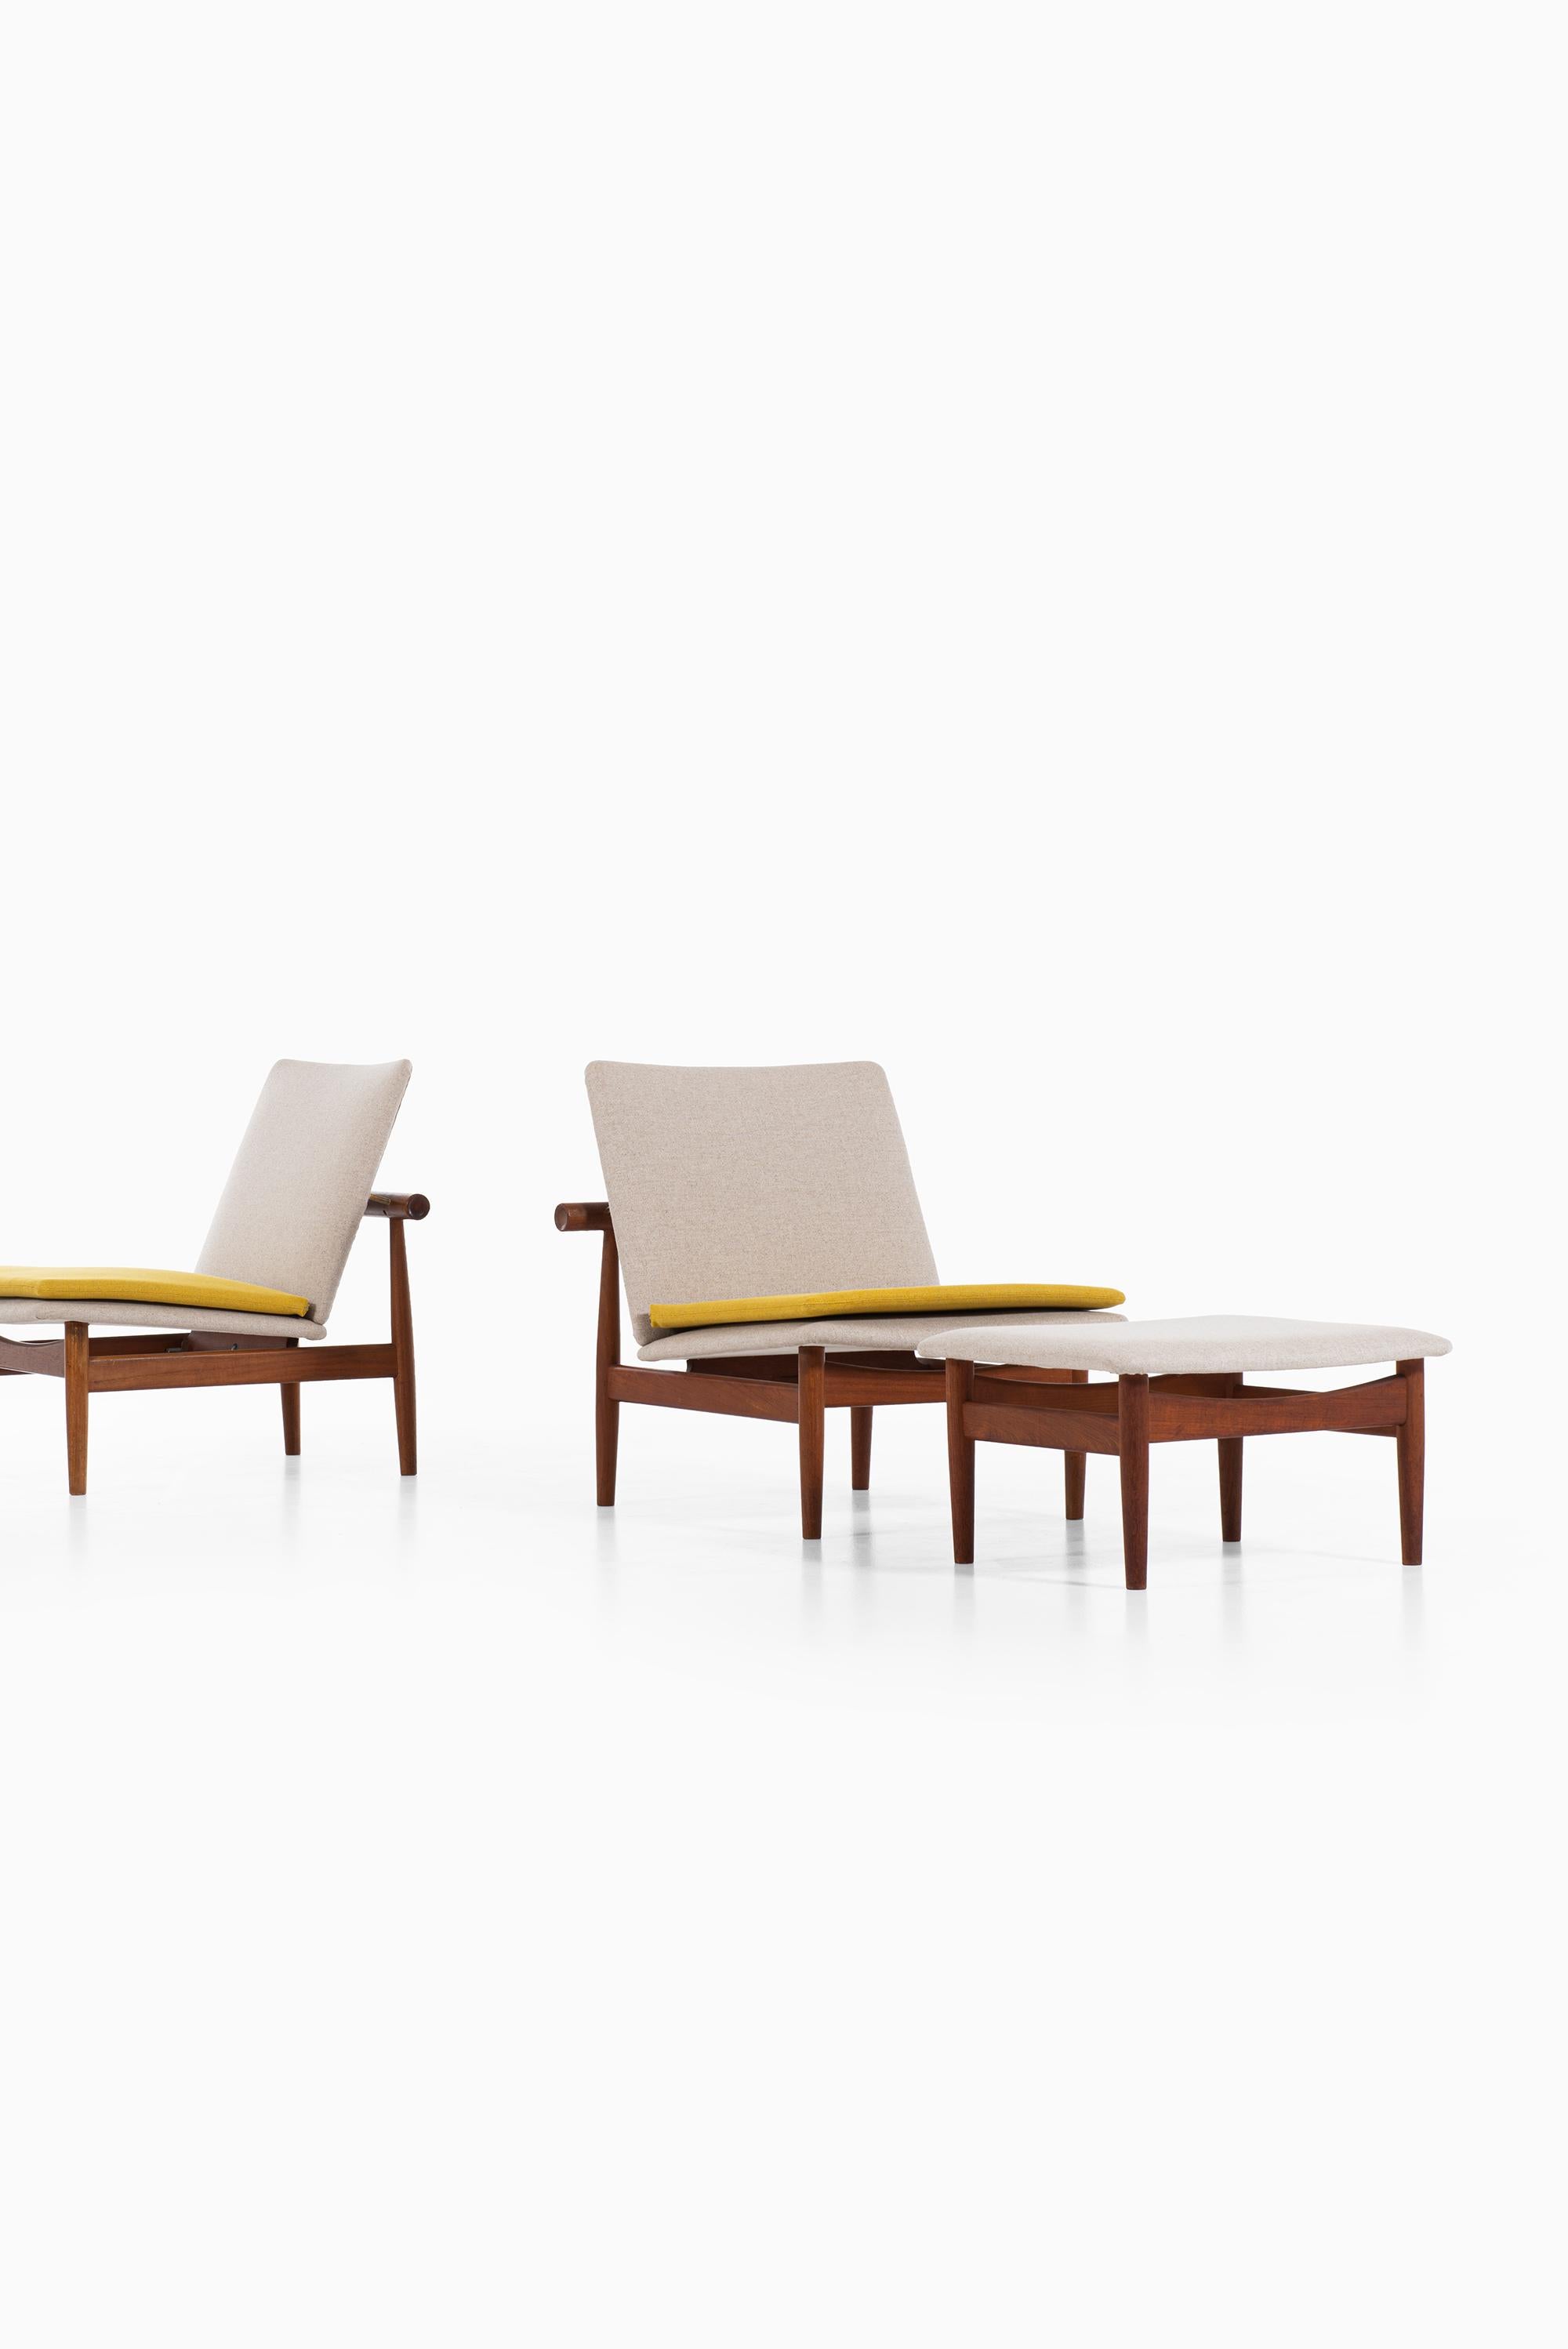 Rare pair of easy chairs model Japan / FD-137 with foot stools designed by Finn Juhl. Produced by France & Son in Denmark.